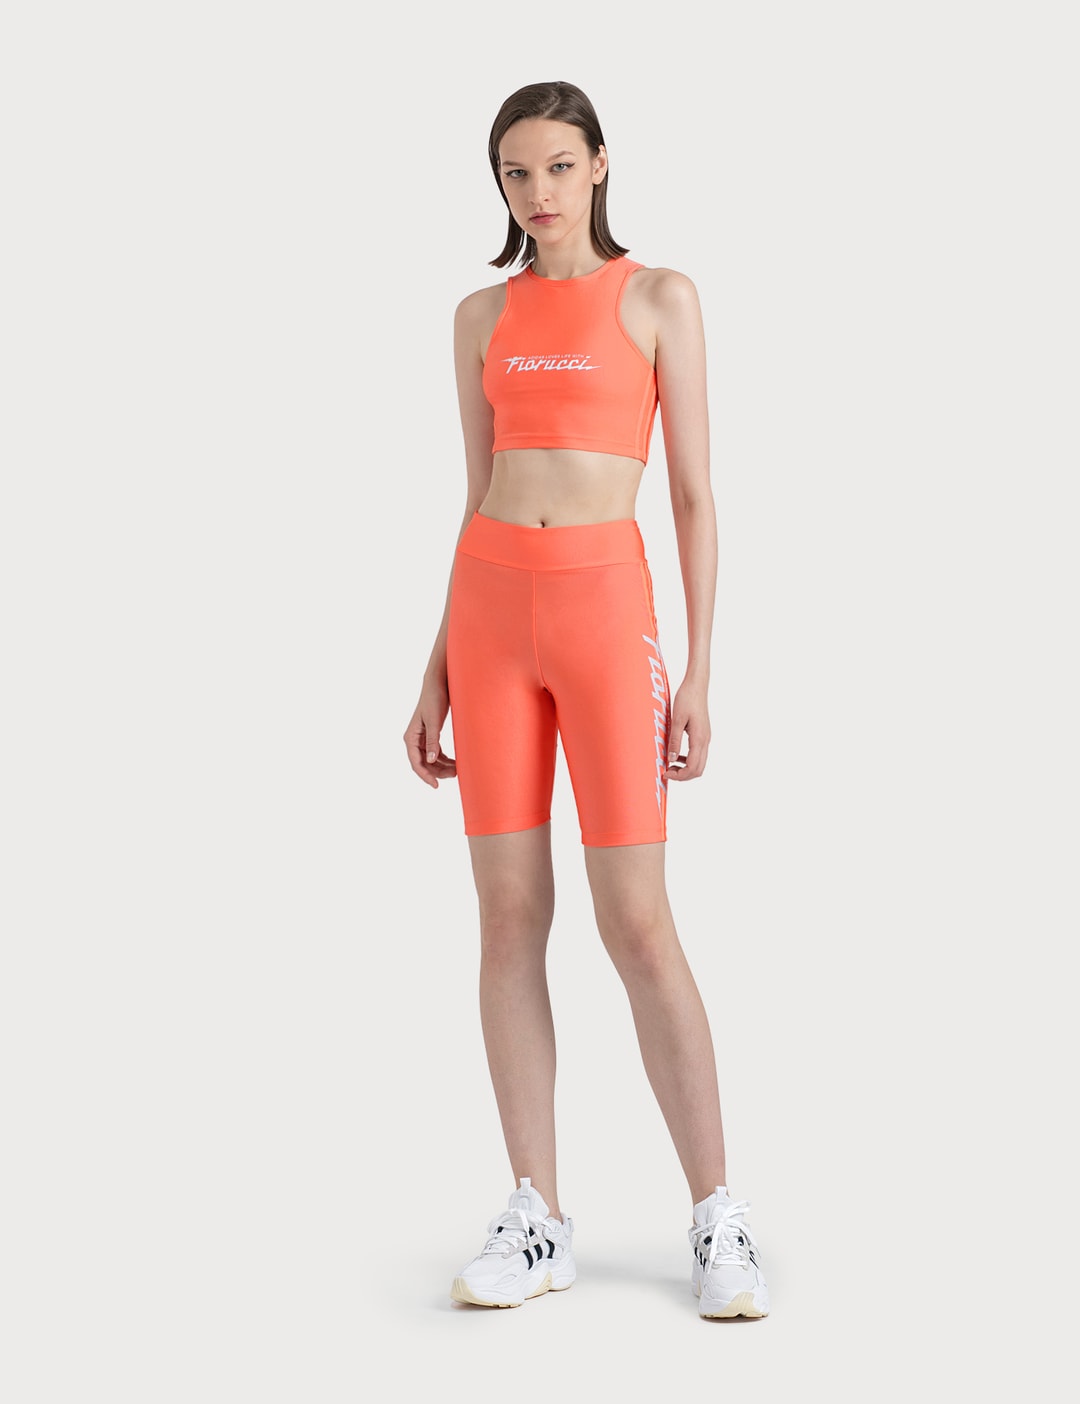 drivende båd kabel Adidas Originals - Fiorucci x Adidas Originals Cycling Shorts | HBX -  Globally Curated Fashion and Lifestyle by Hypebeast